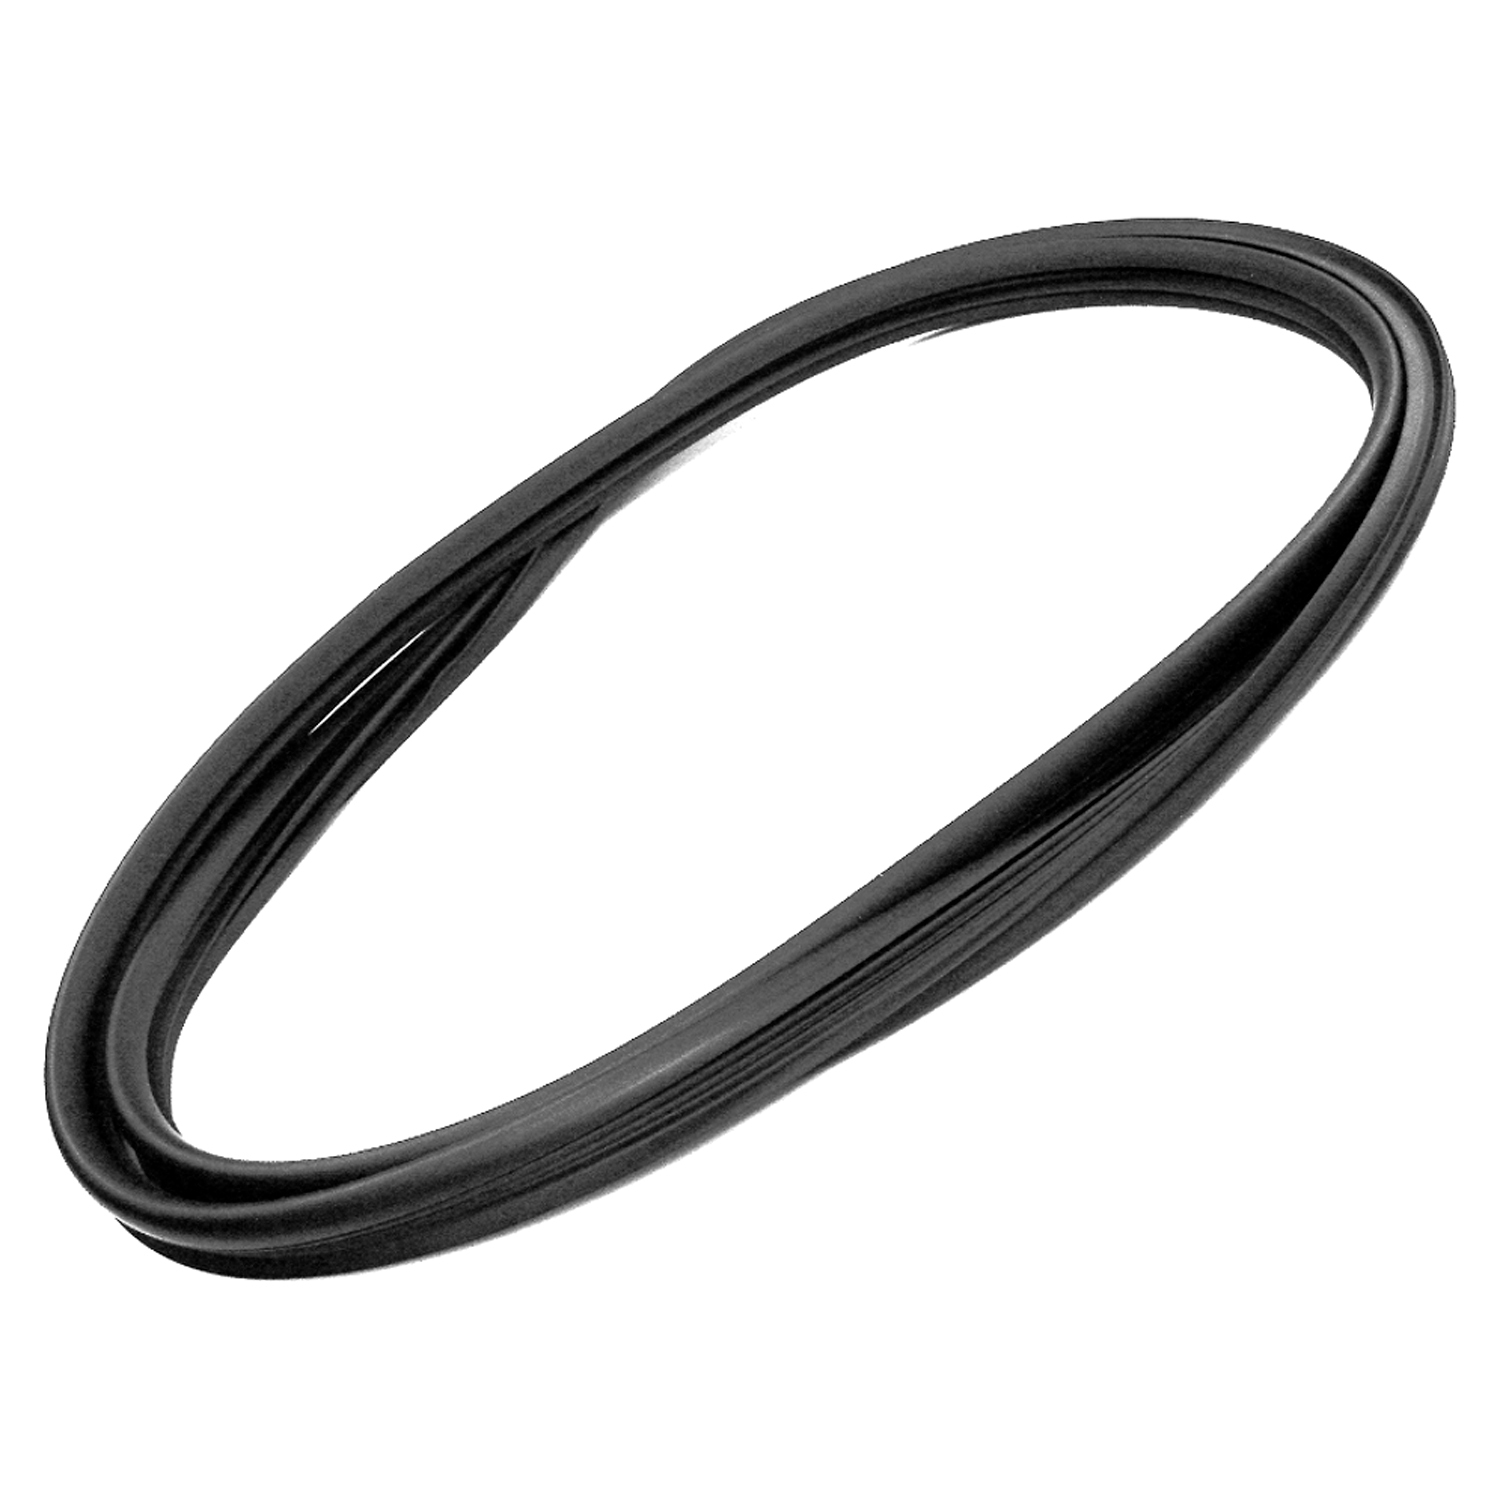 1978 GMC Jimmy Windshield Seal, 73-87 GM Full Size Truck, 73-91 GM SUV, Without Trim Groove-VWS 7313-D